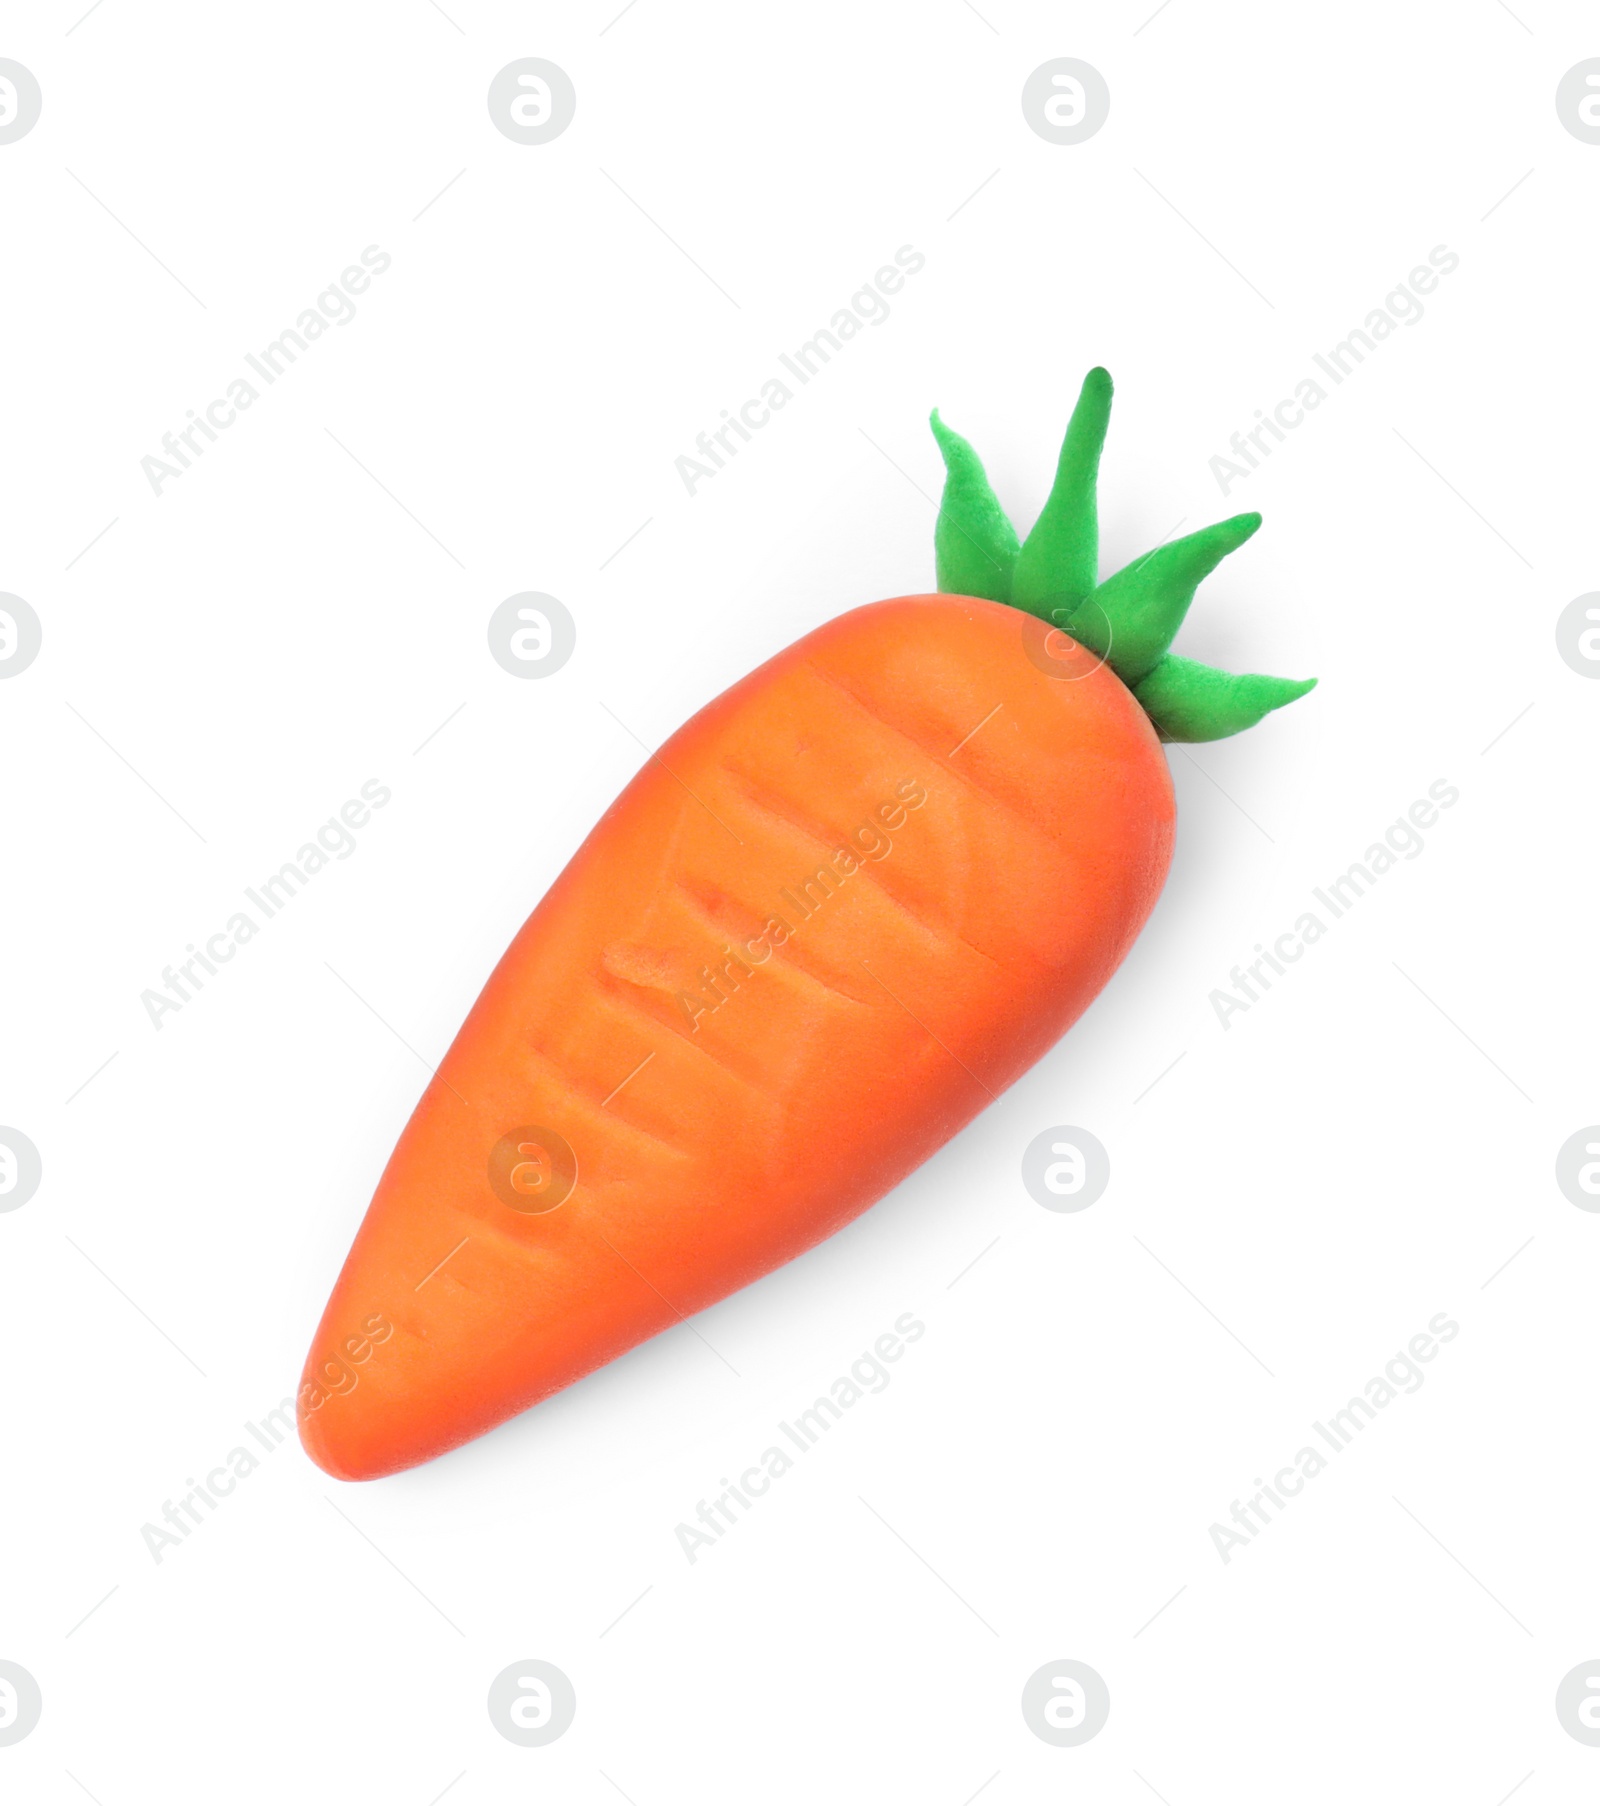 Photo of Orange carrot made from play dough on white background